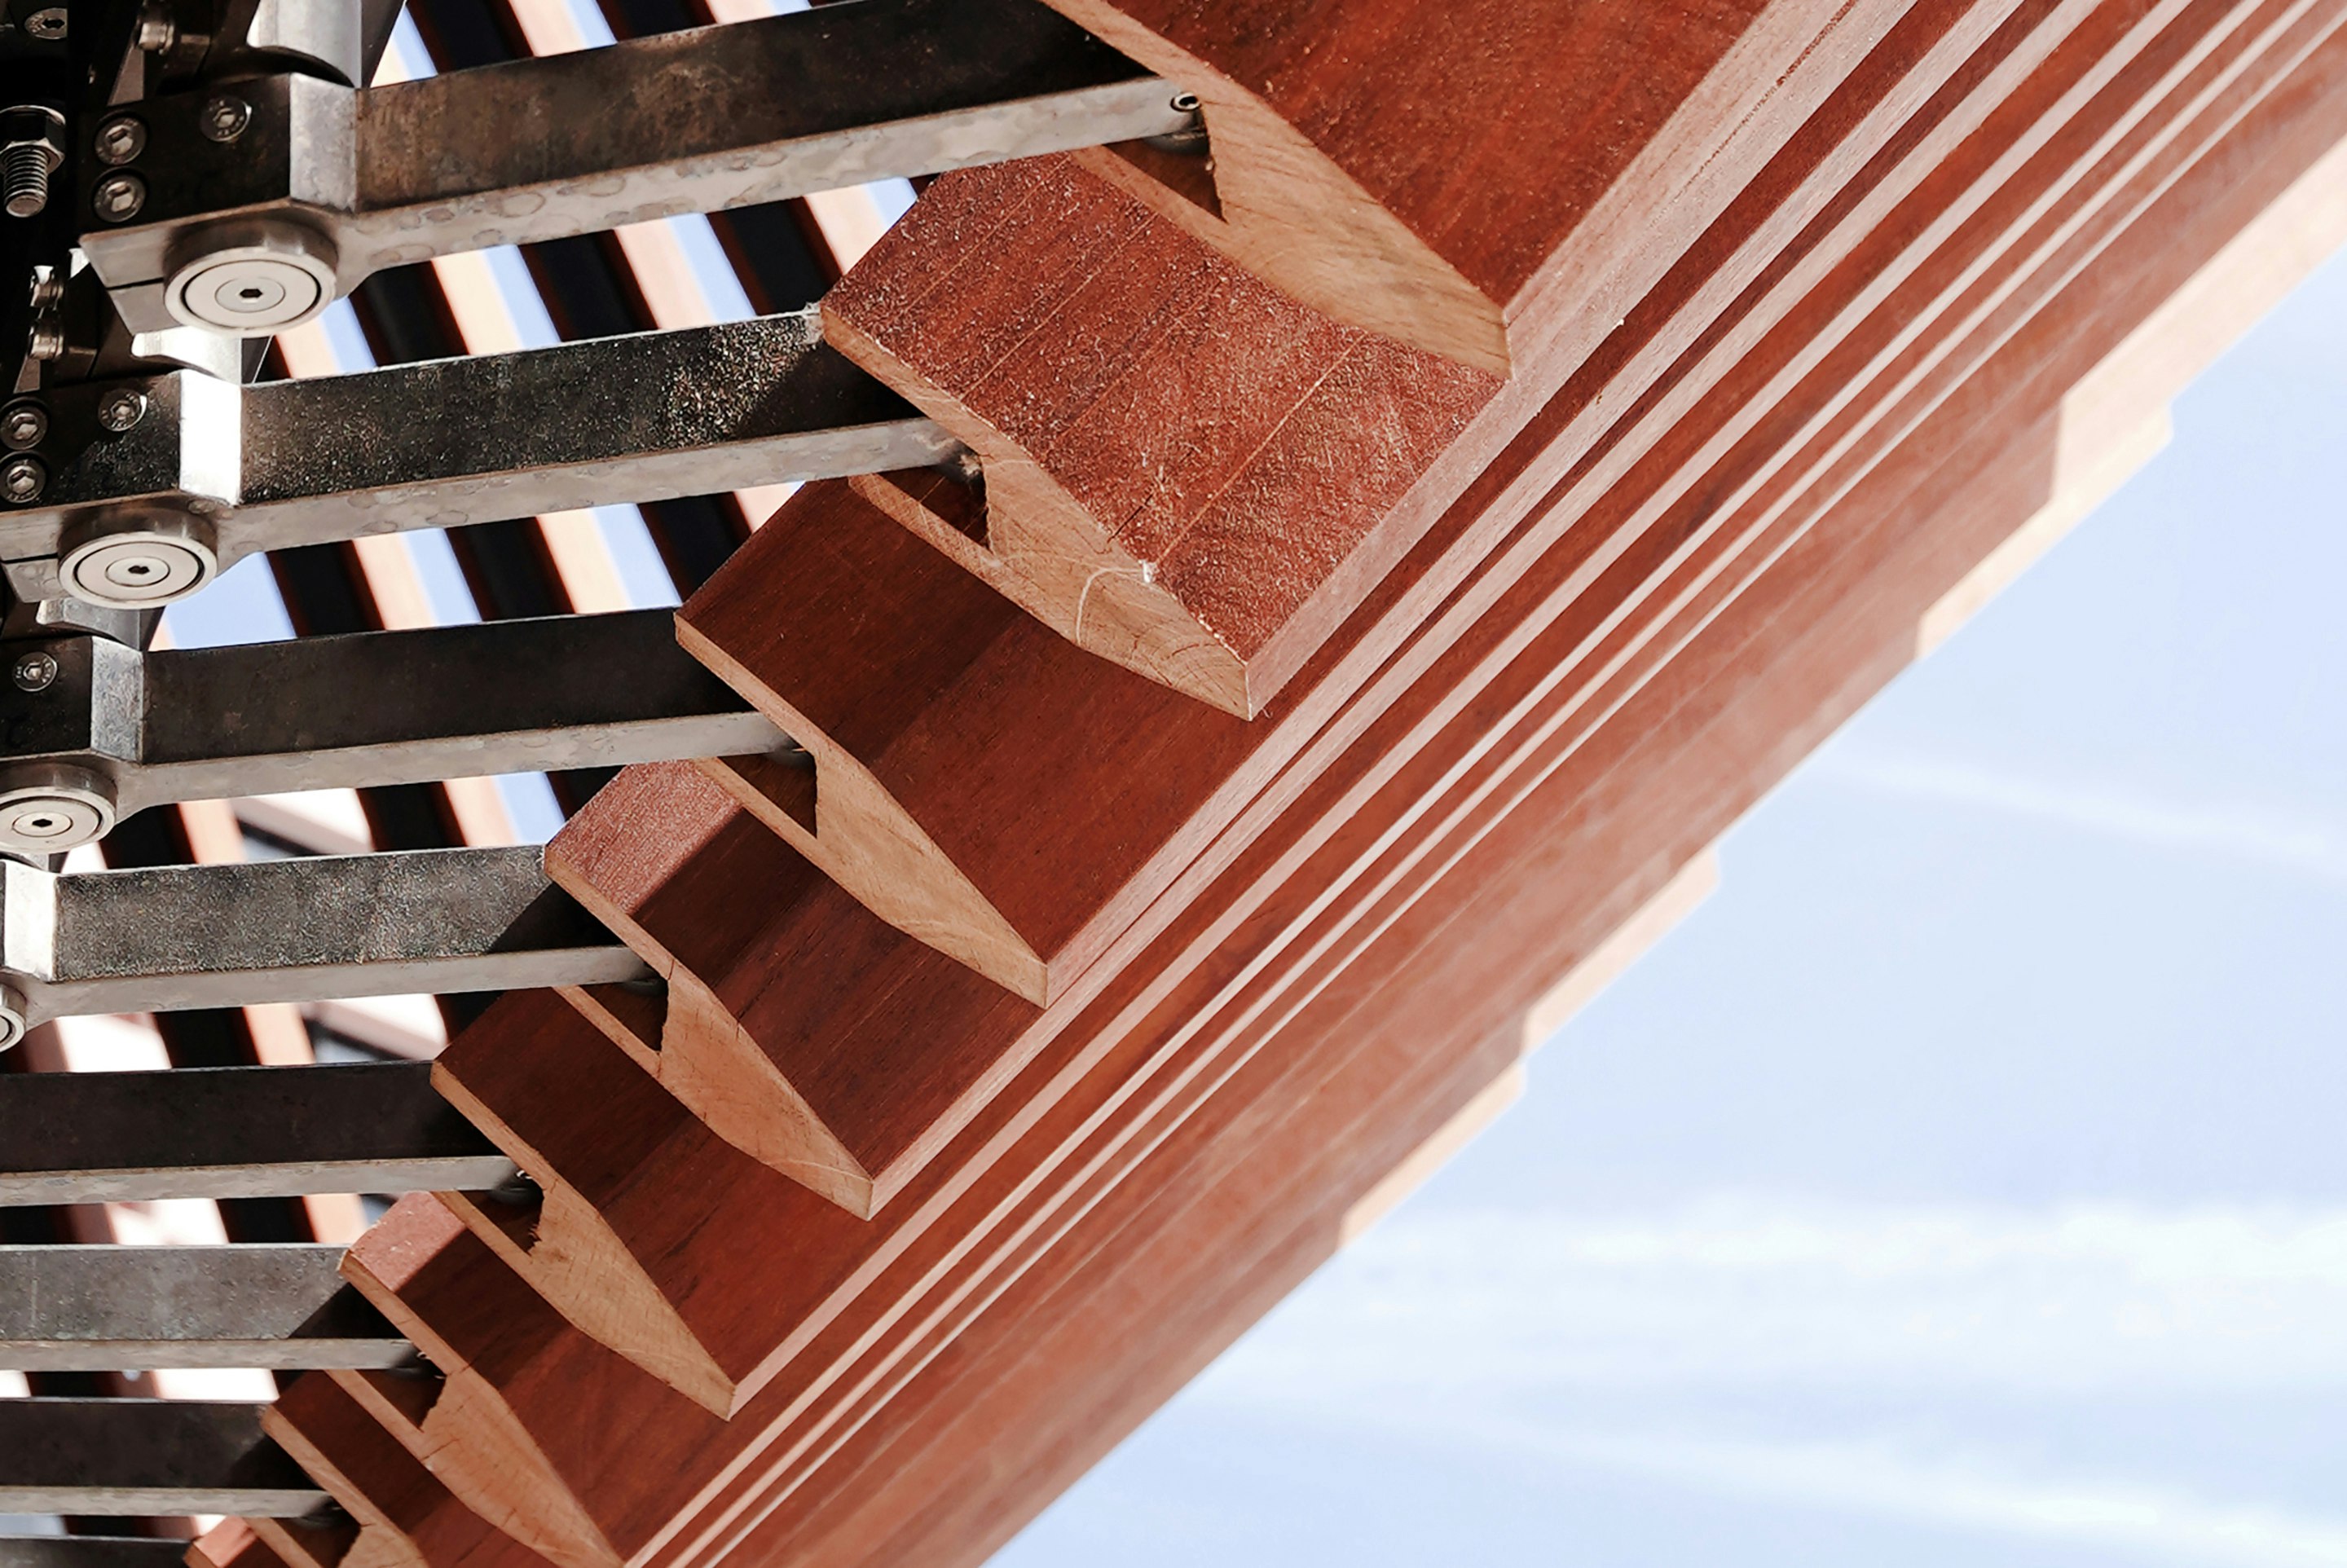 A detail of the Kiosk's timber slats